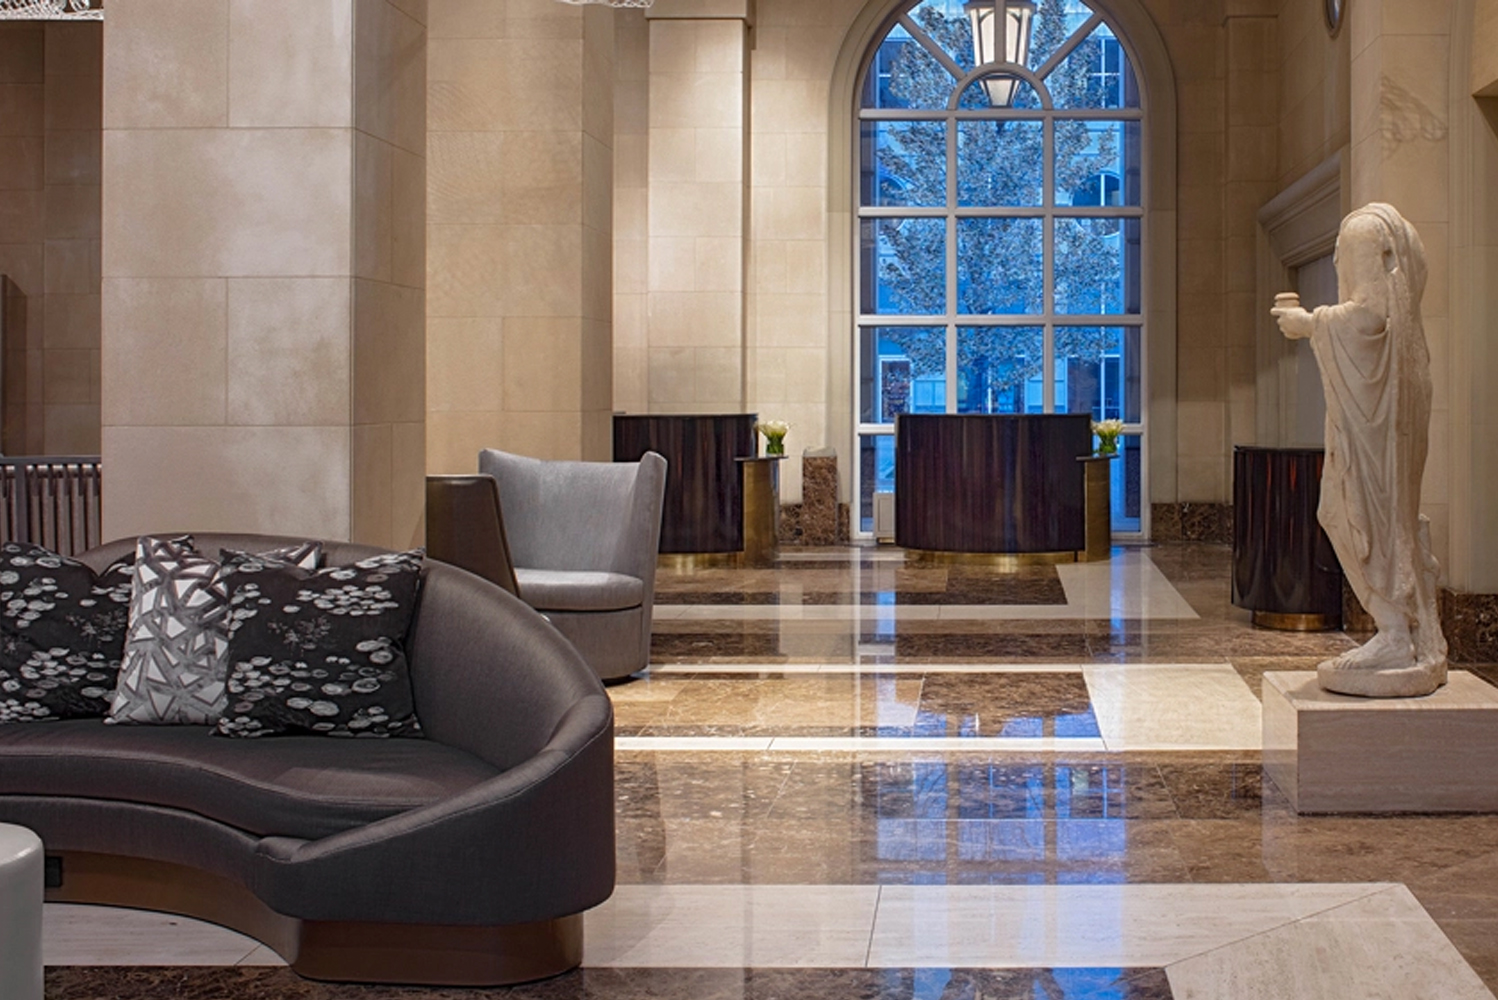 Hotel Crescent Court  a property located in Dallas Uptown  completed a year-long 33 million overhaul